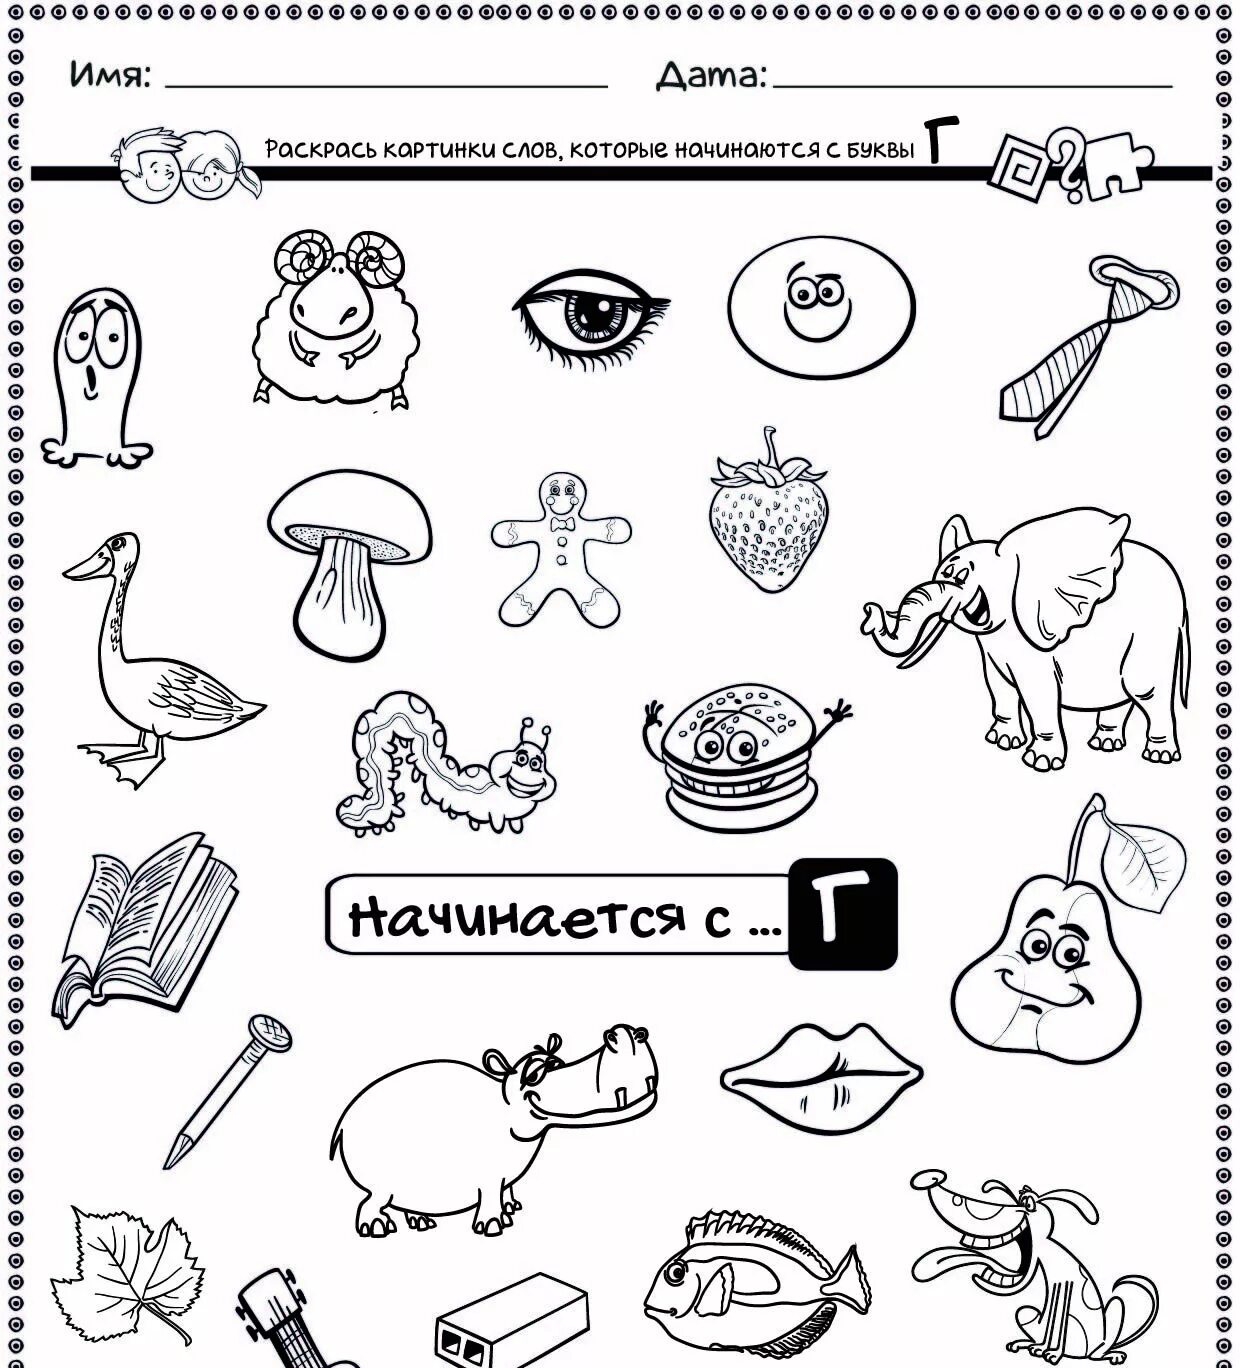 Playful coloring book for memorizing letters